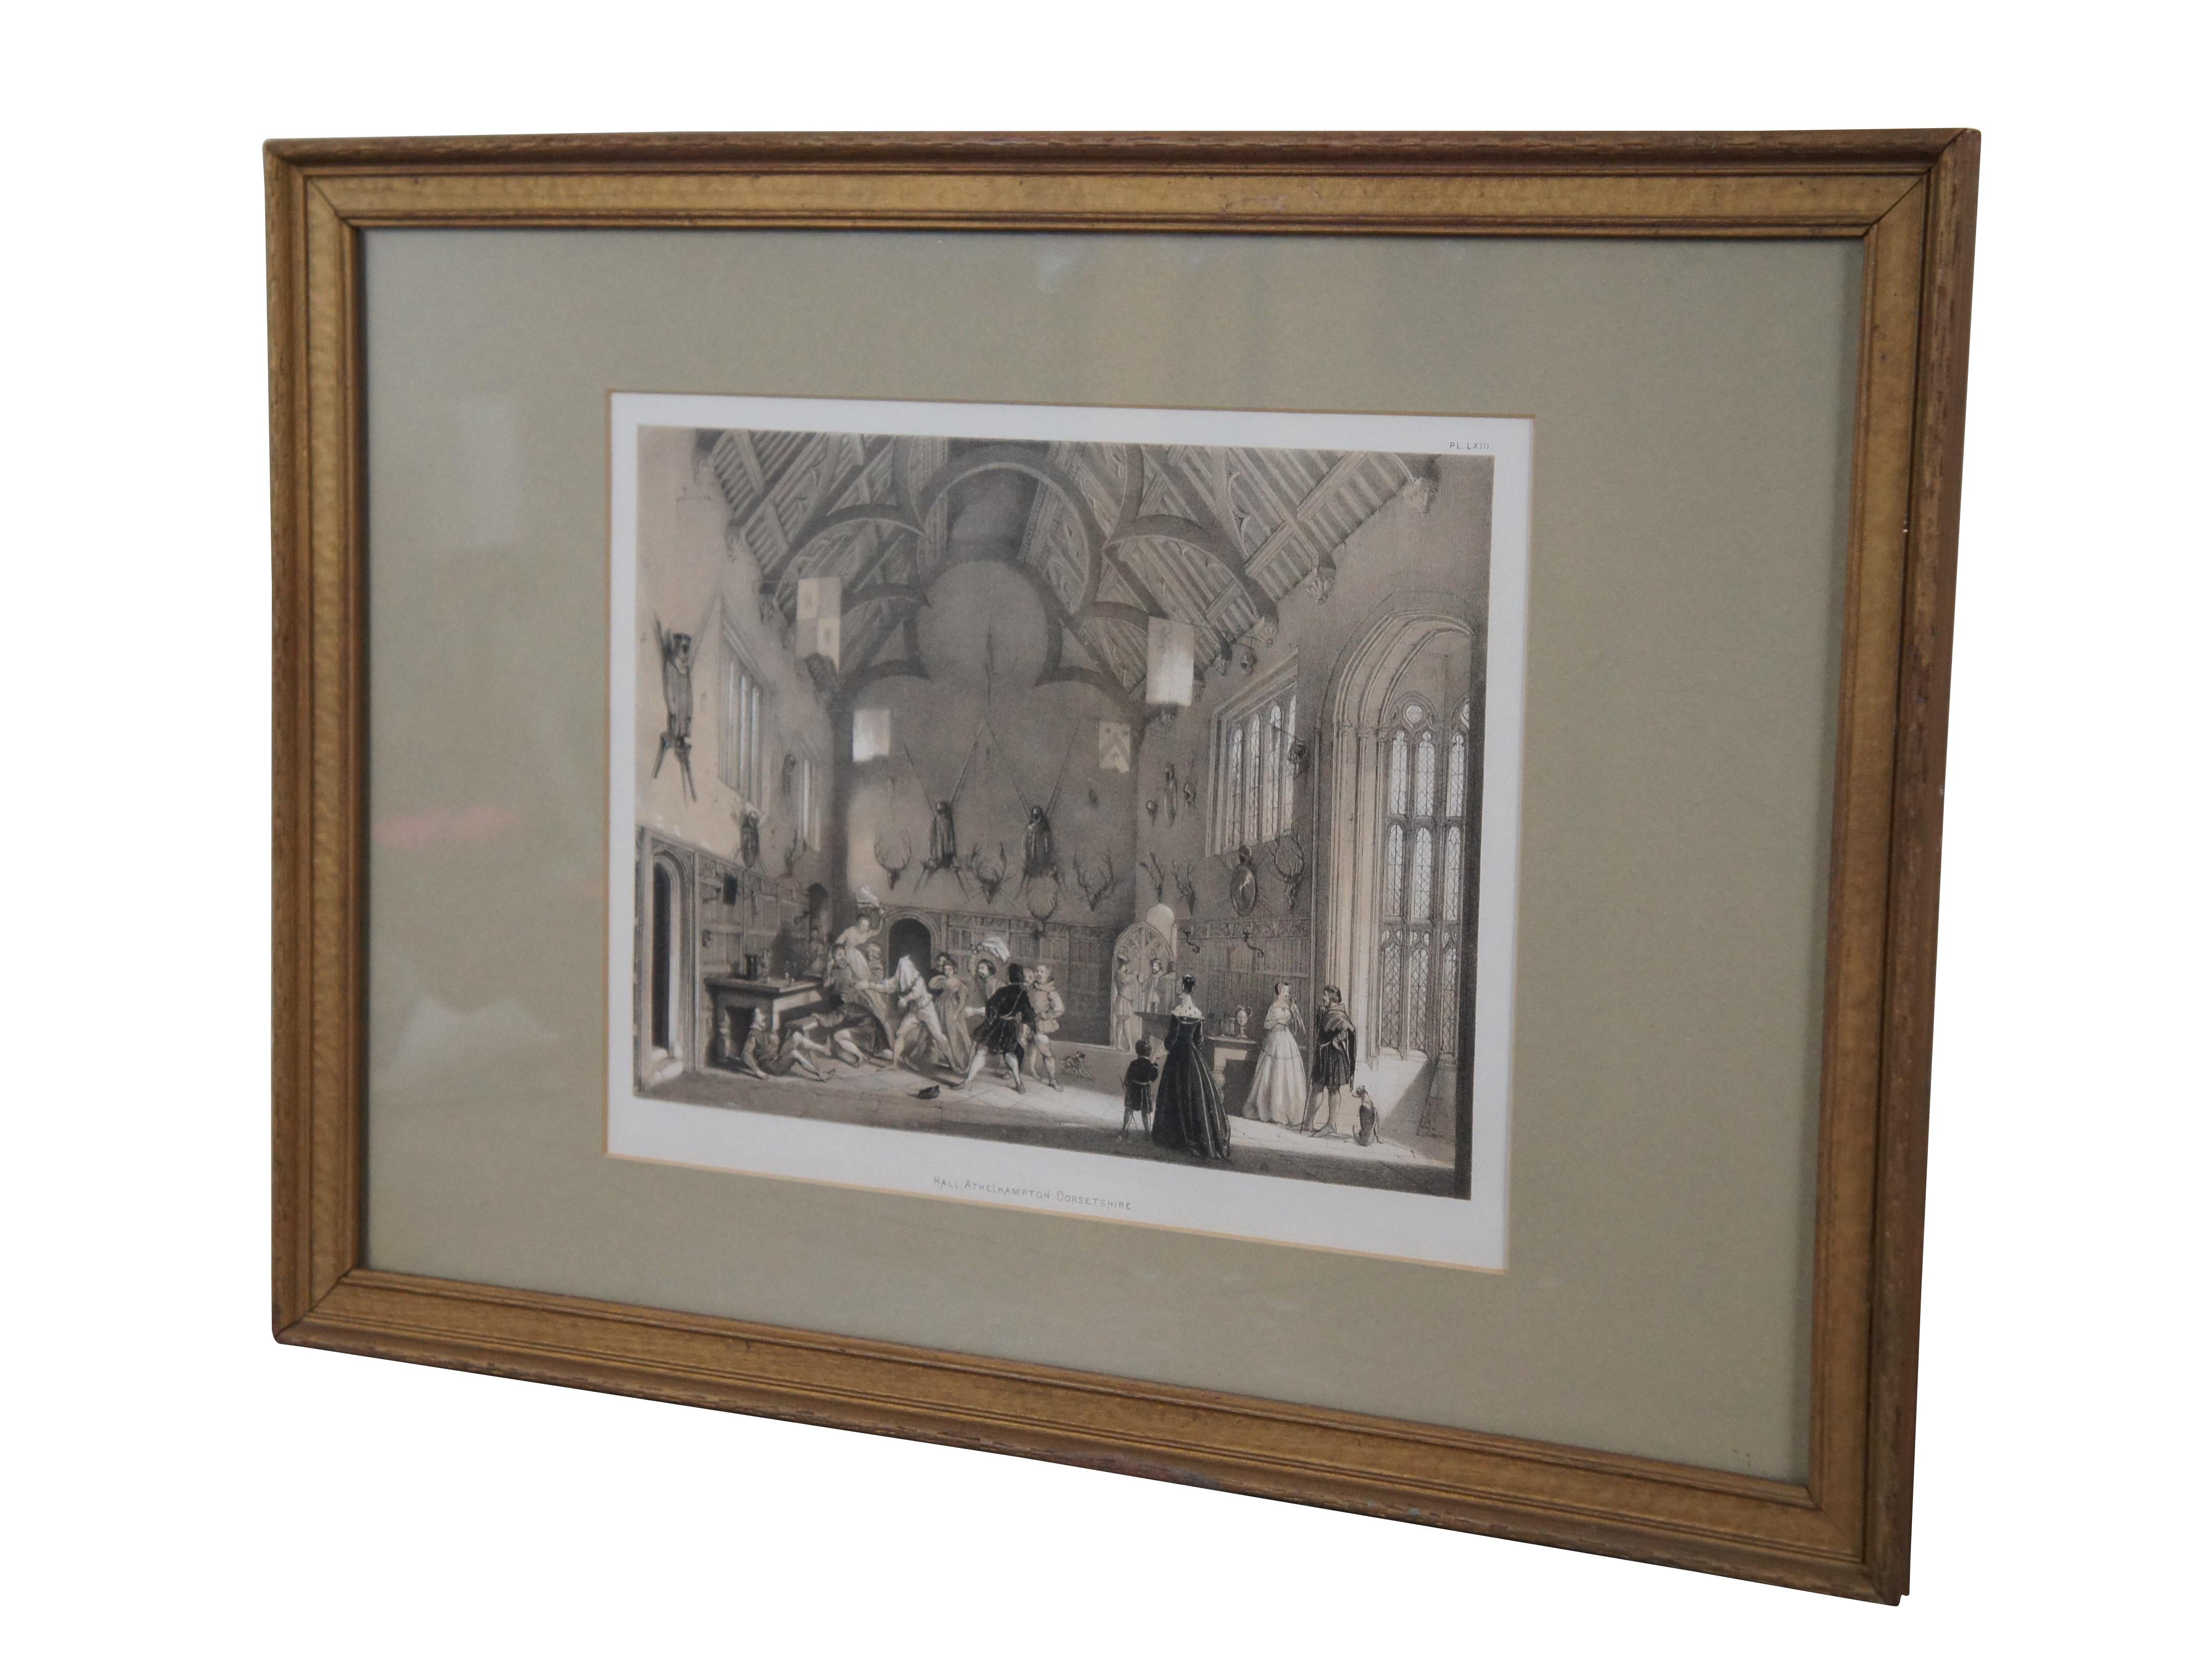 Antique lithograph print titled “Hall, Athelhampton, Dorsetshire” showing a game of blind man’s bluff being played in Athelhampton House, a Tudor manor in Dorset, England. This print originates from 'The Mansions of England in the Olden Time' by